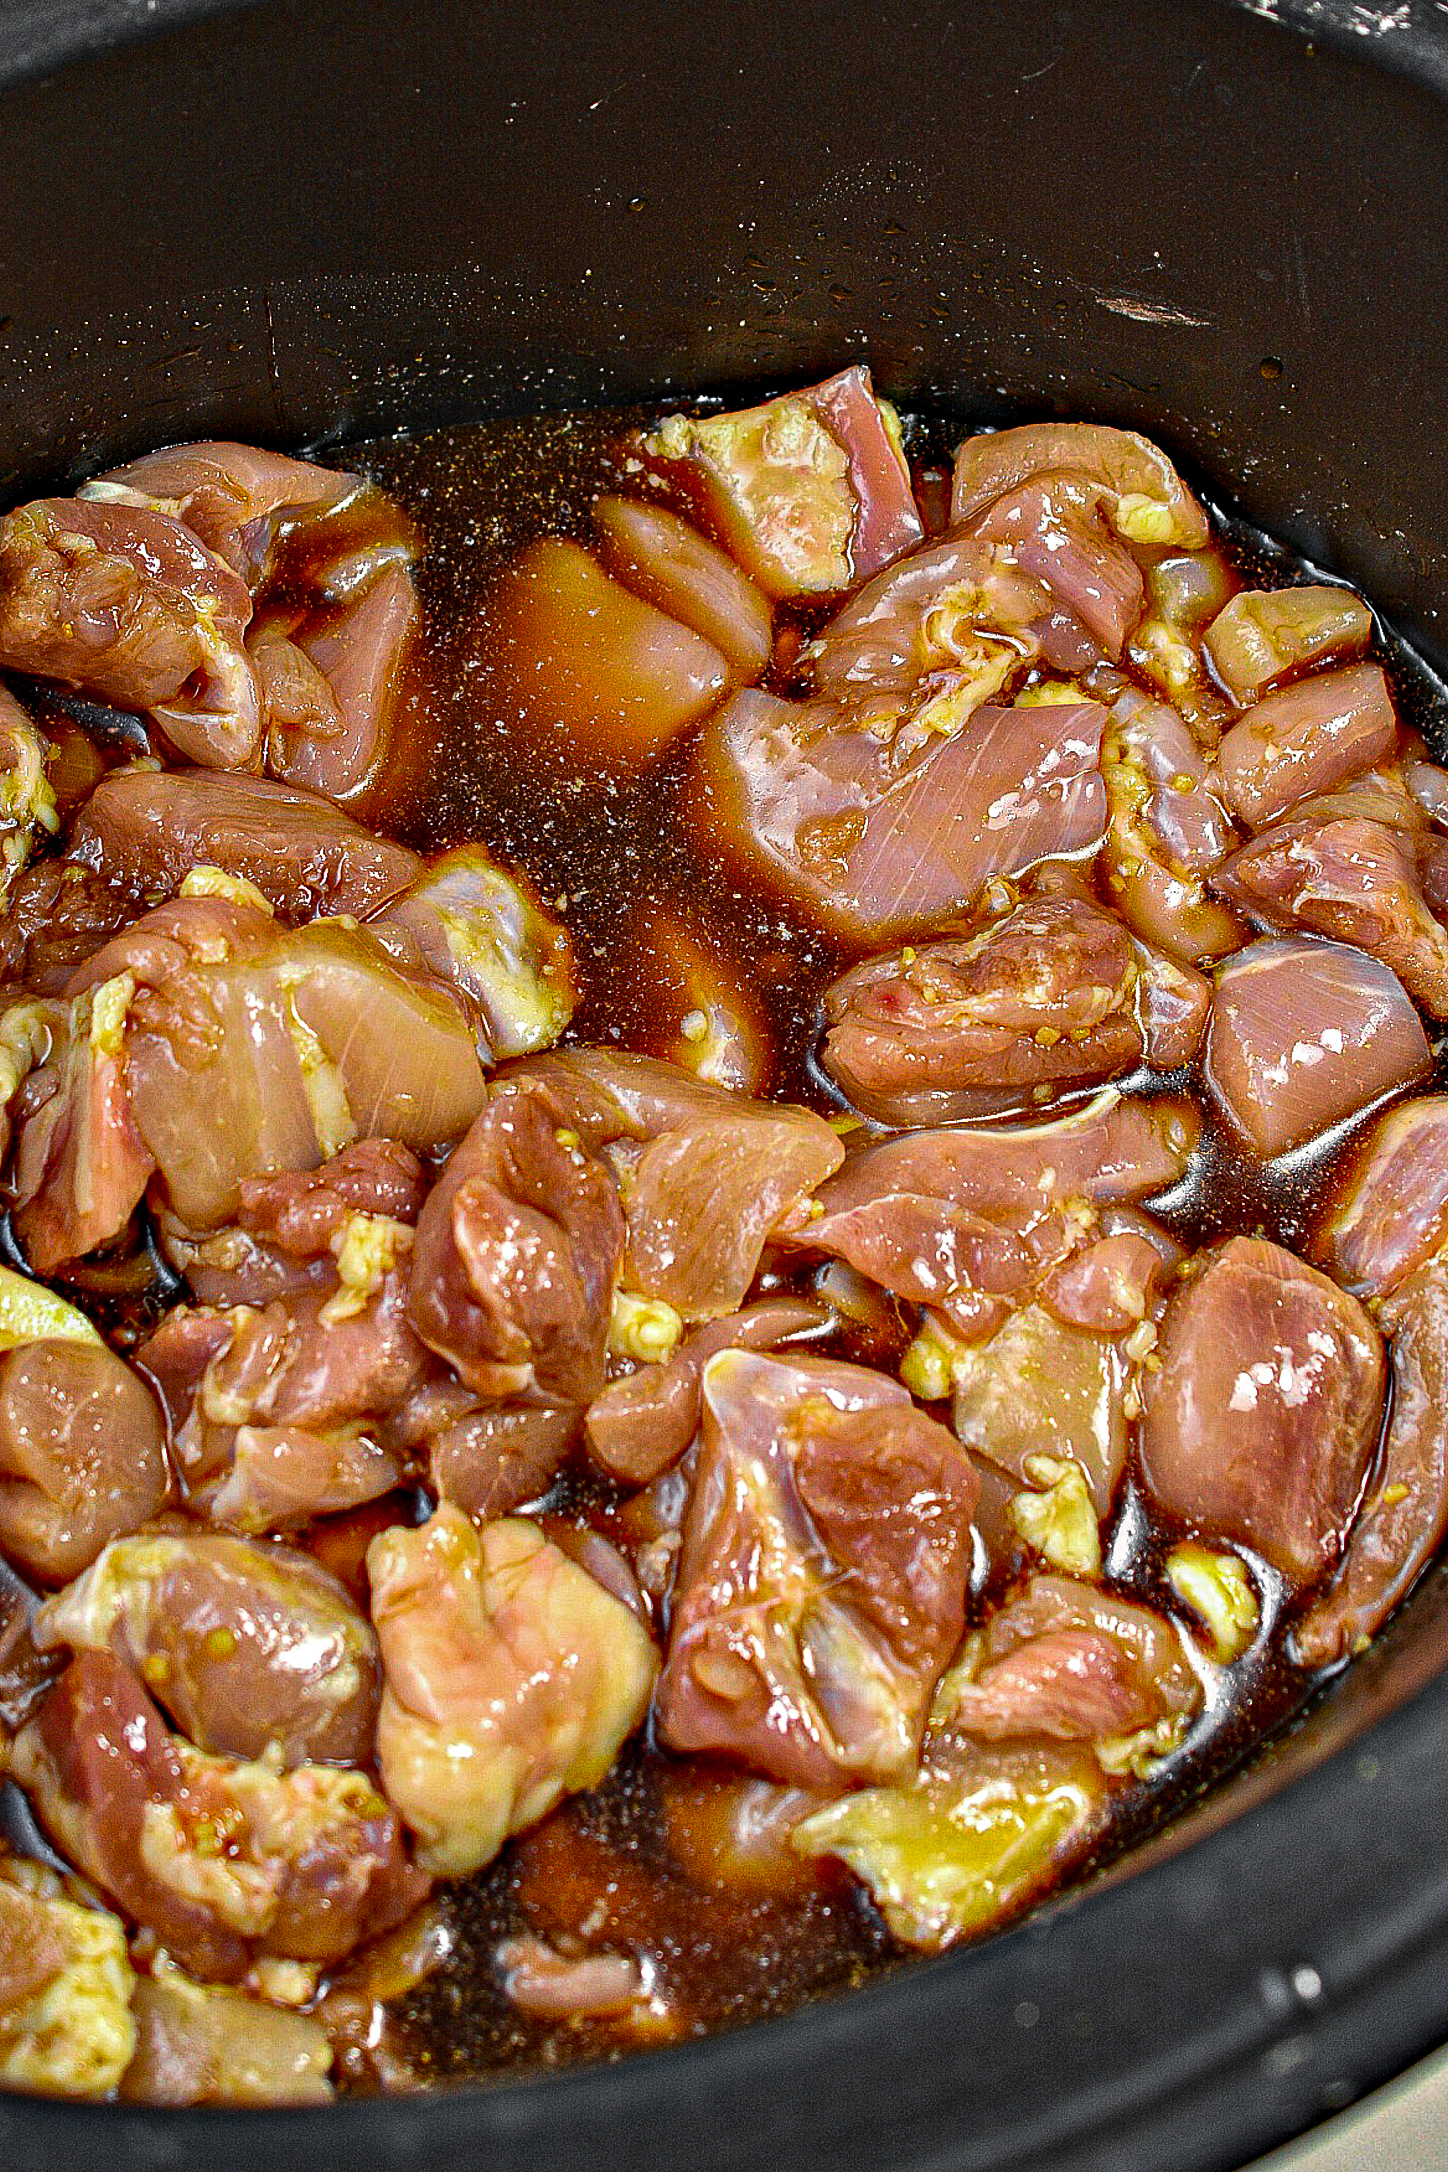 Cut the chicken thighs into bite-sized pieces and add them to the slow cooker. Toss to coat in the sauce.